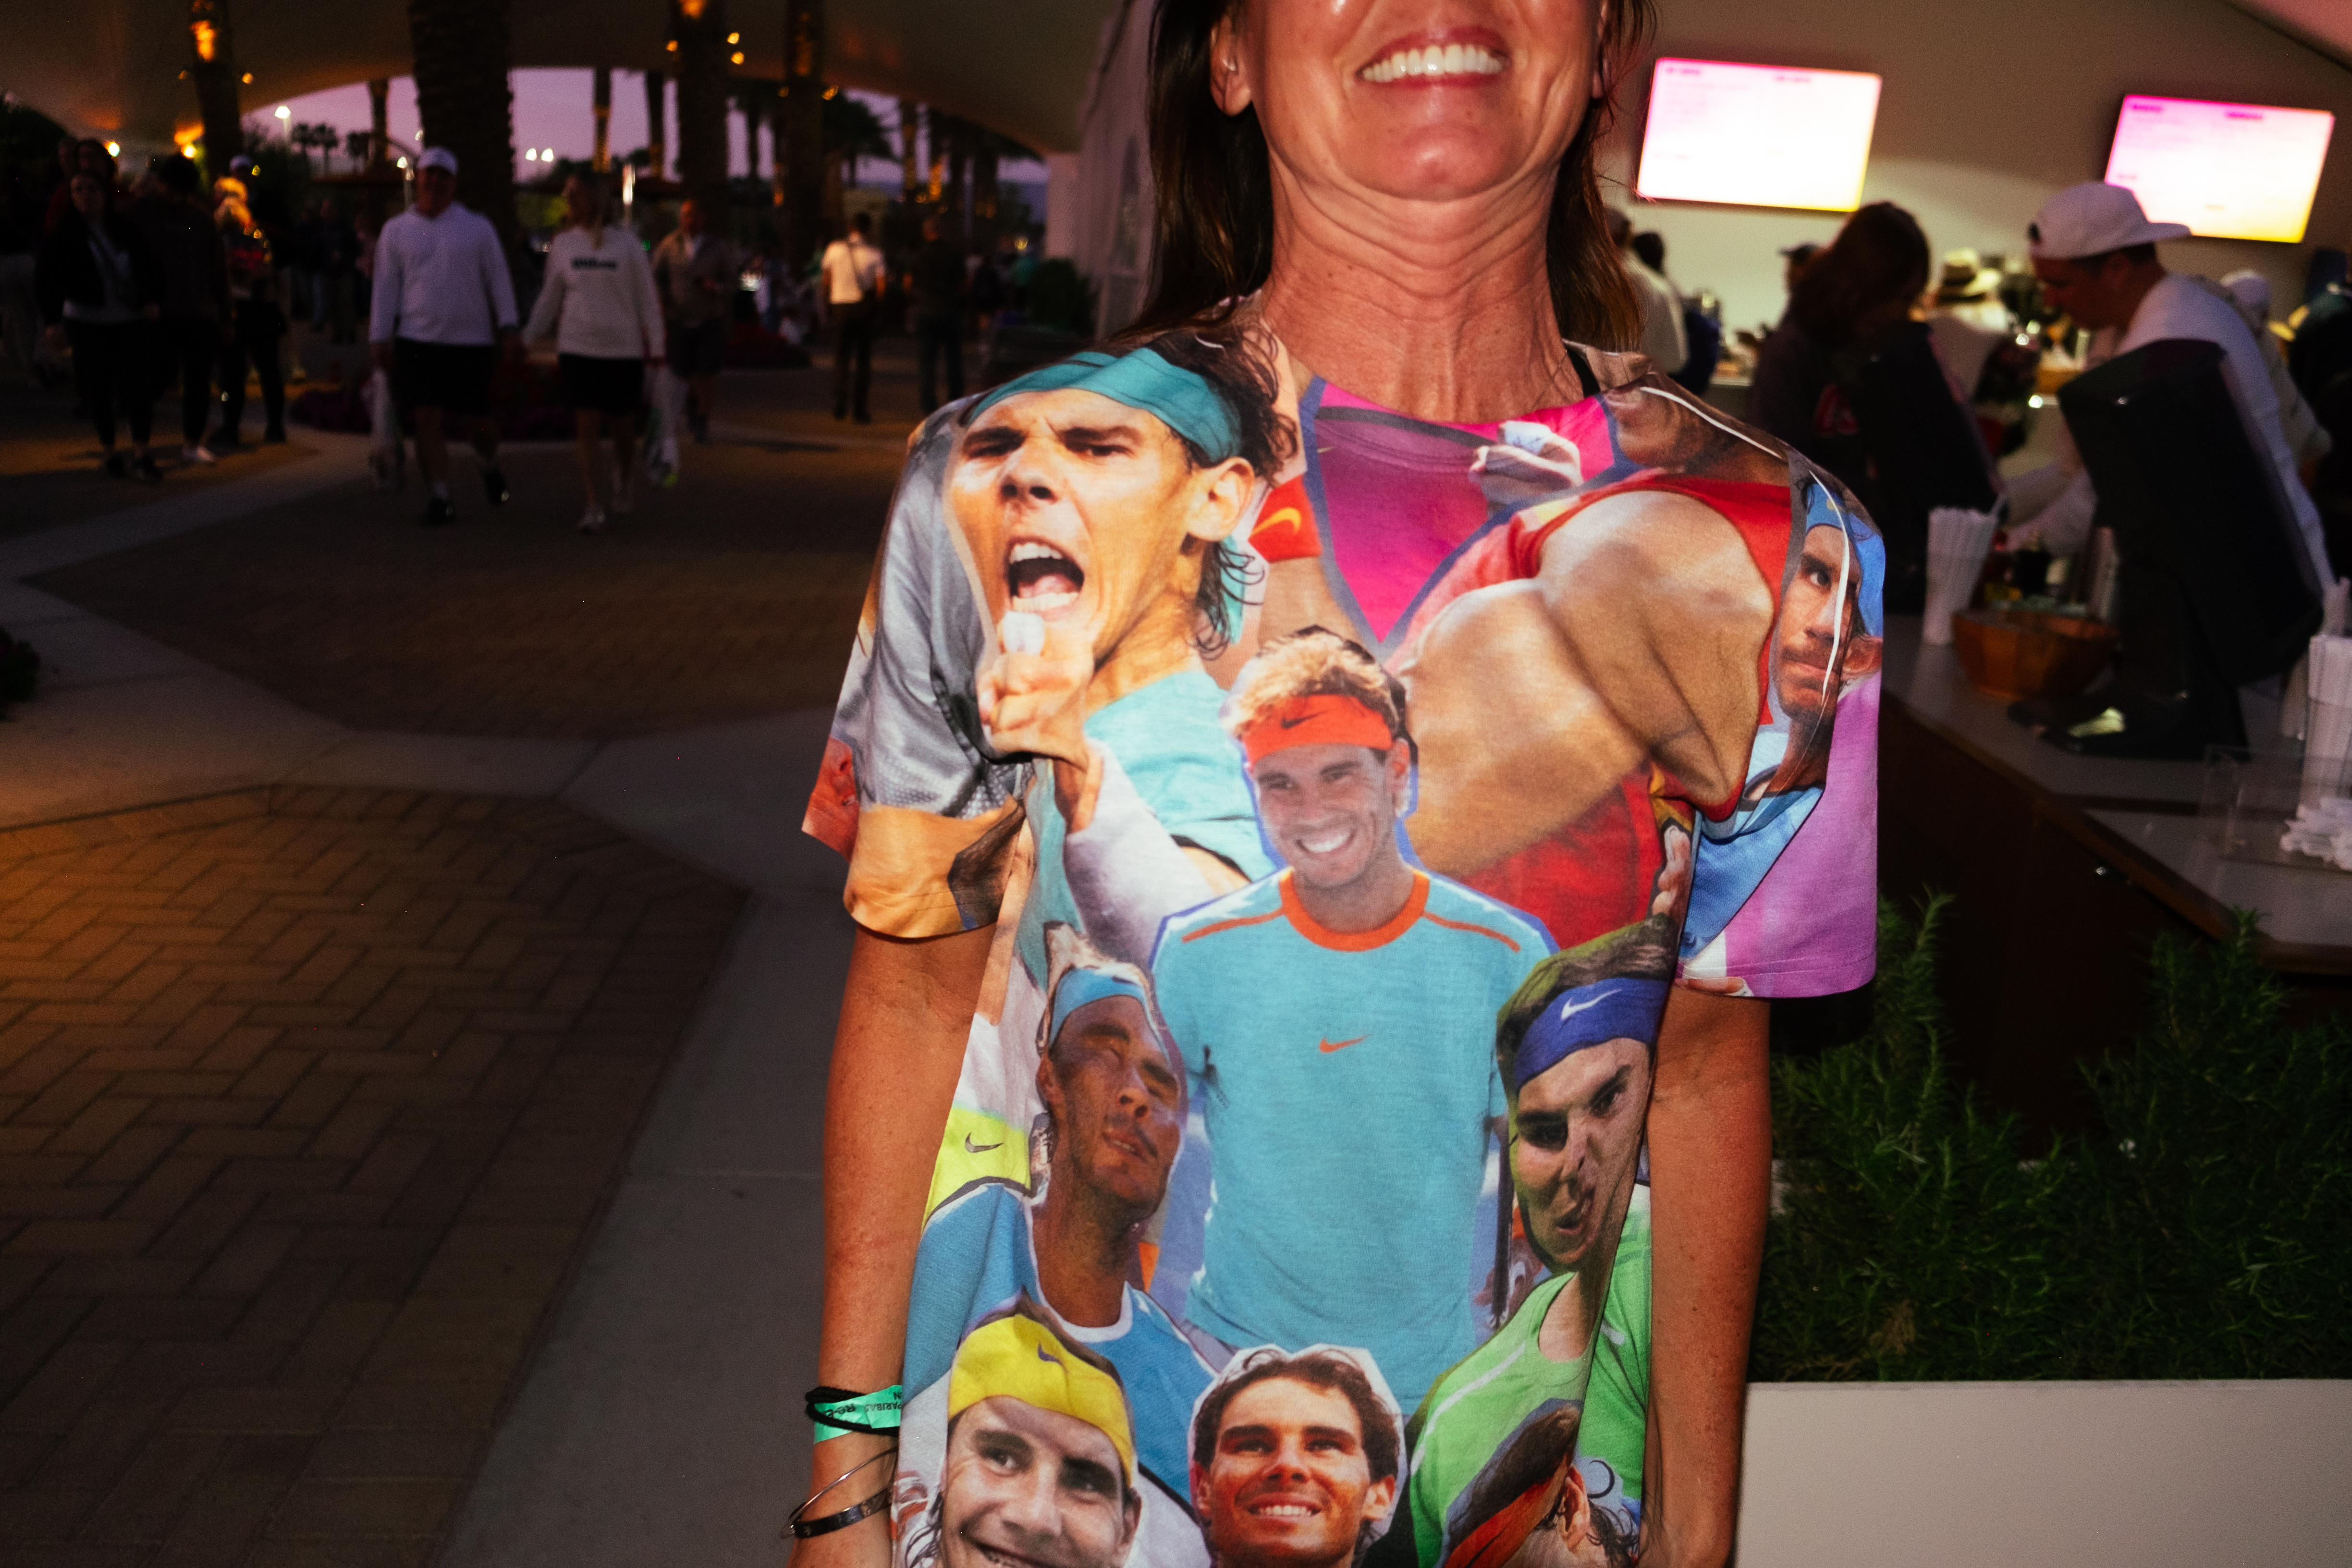 A woman wearing a Rafael Nadal shirt grins for the camera.